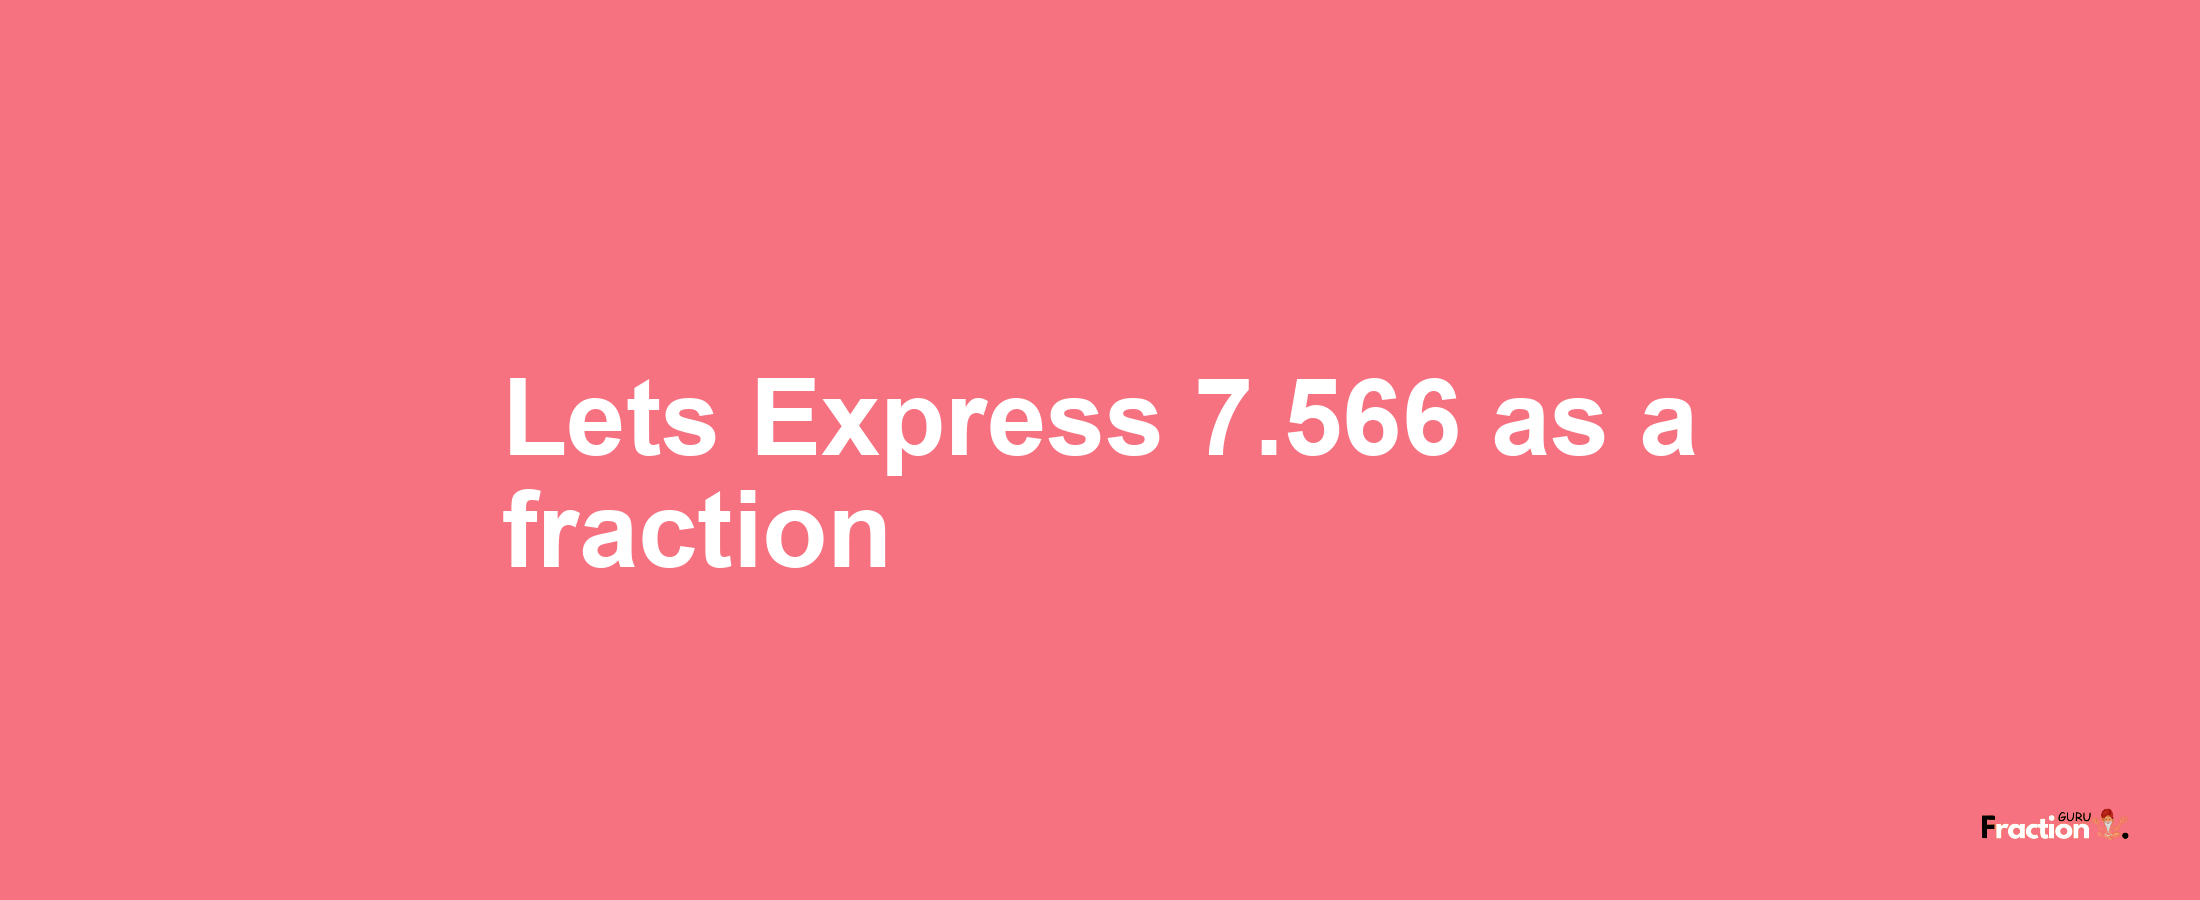 Lets Express 7.566 as afraction